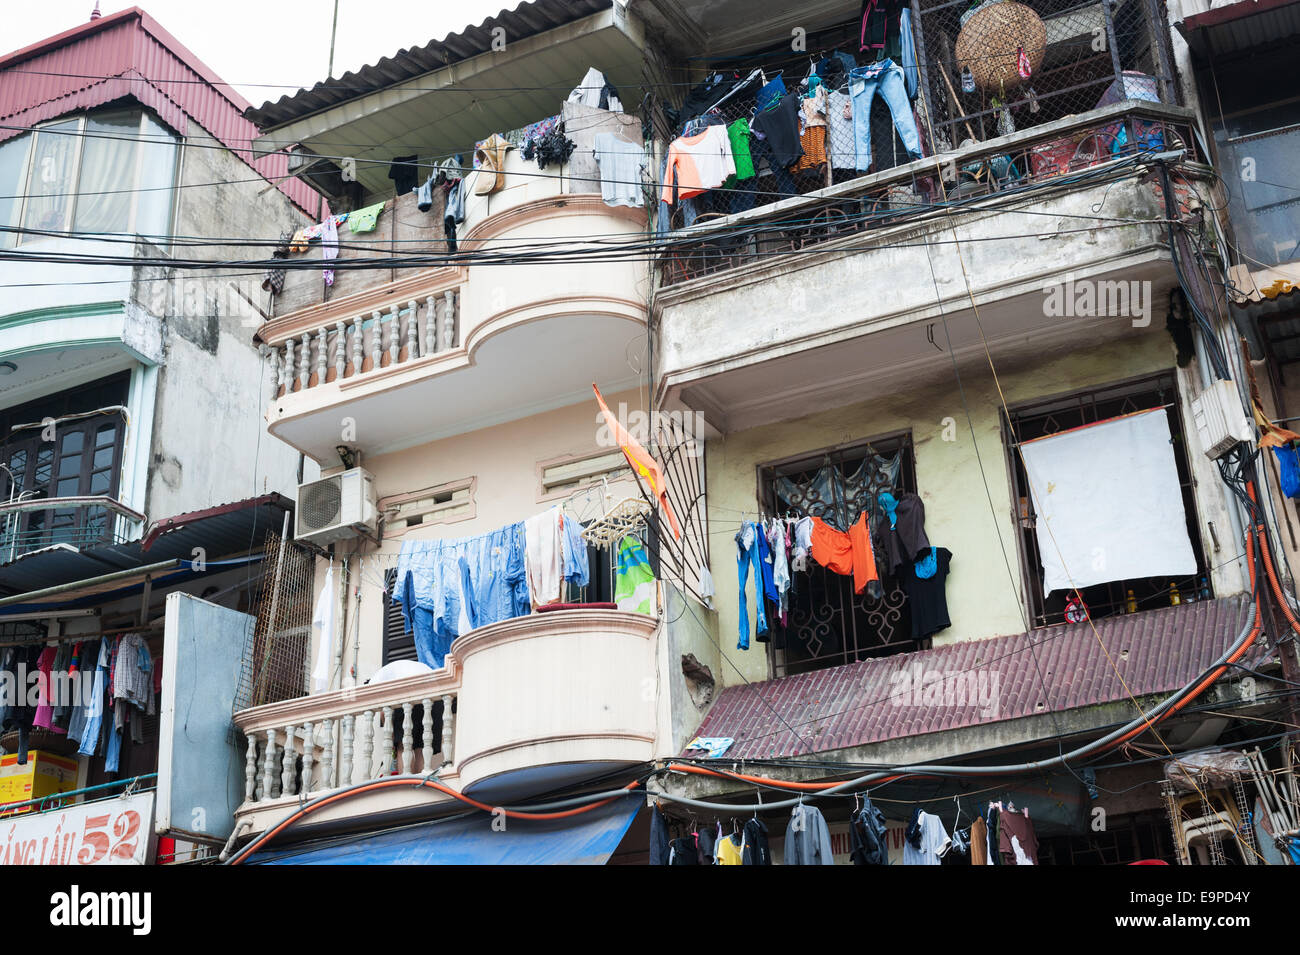 Hanoi housing - laundry drying on the balconies of an apartment building in Vietnam Stock Photo